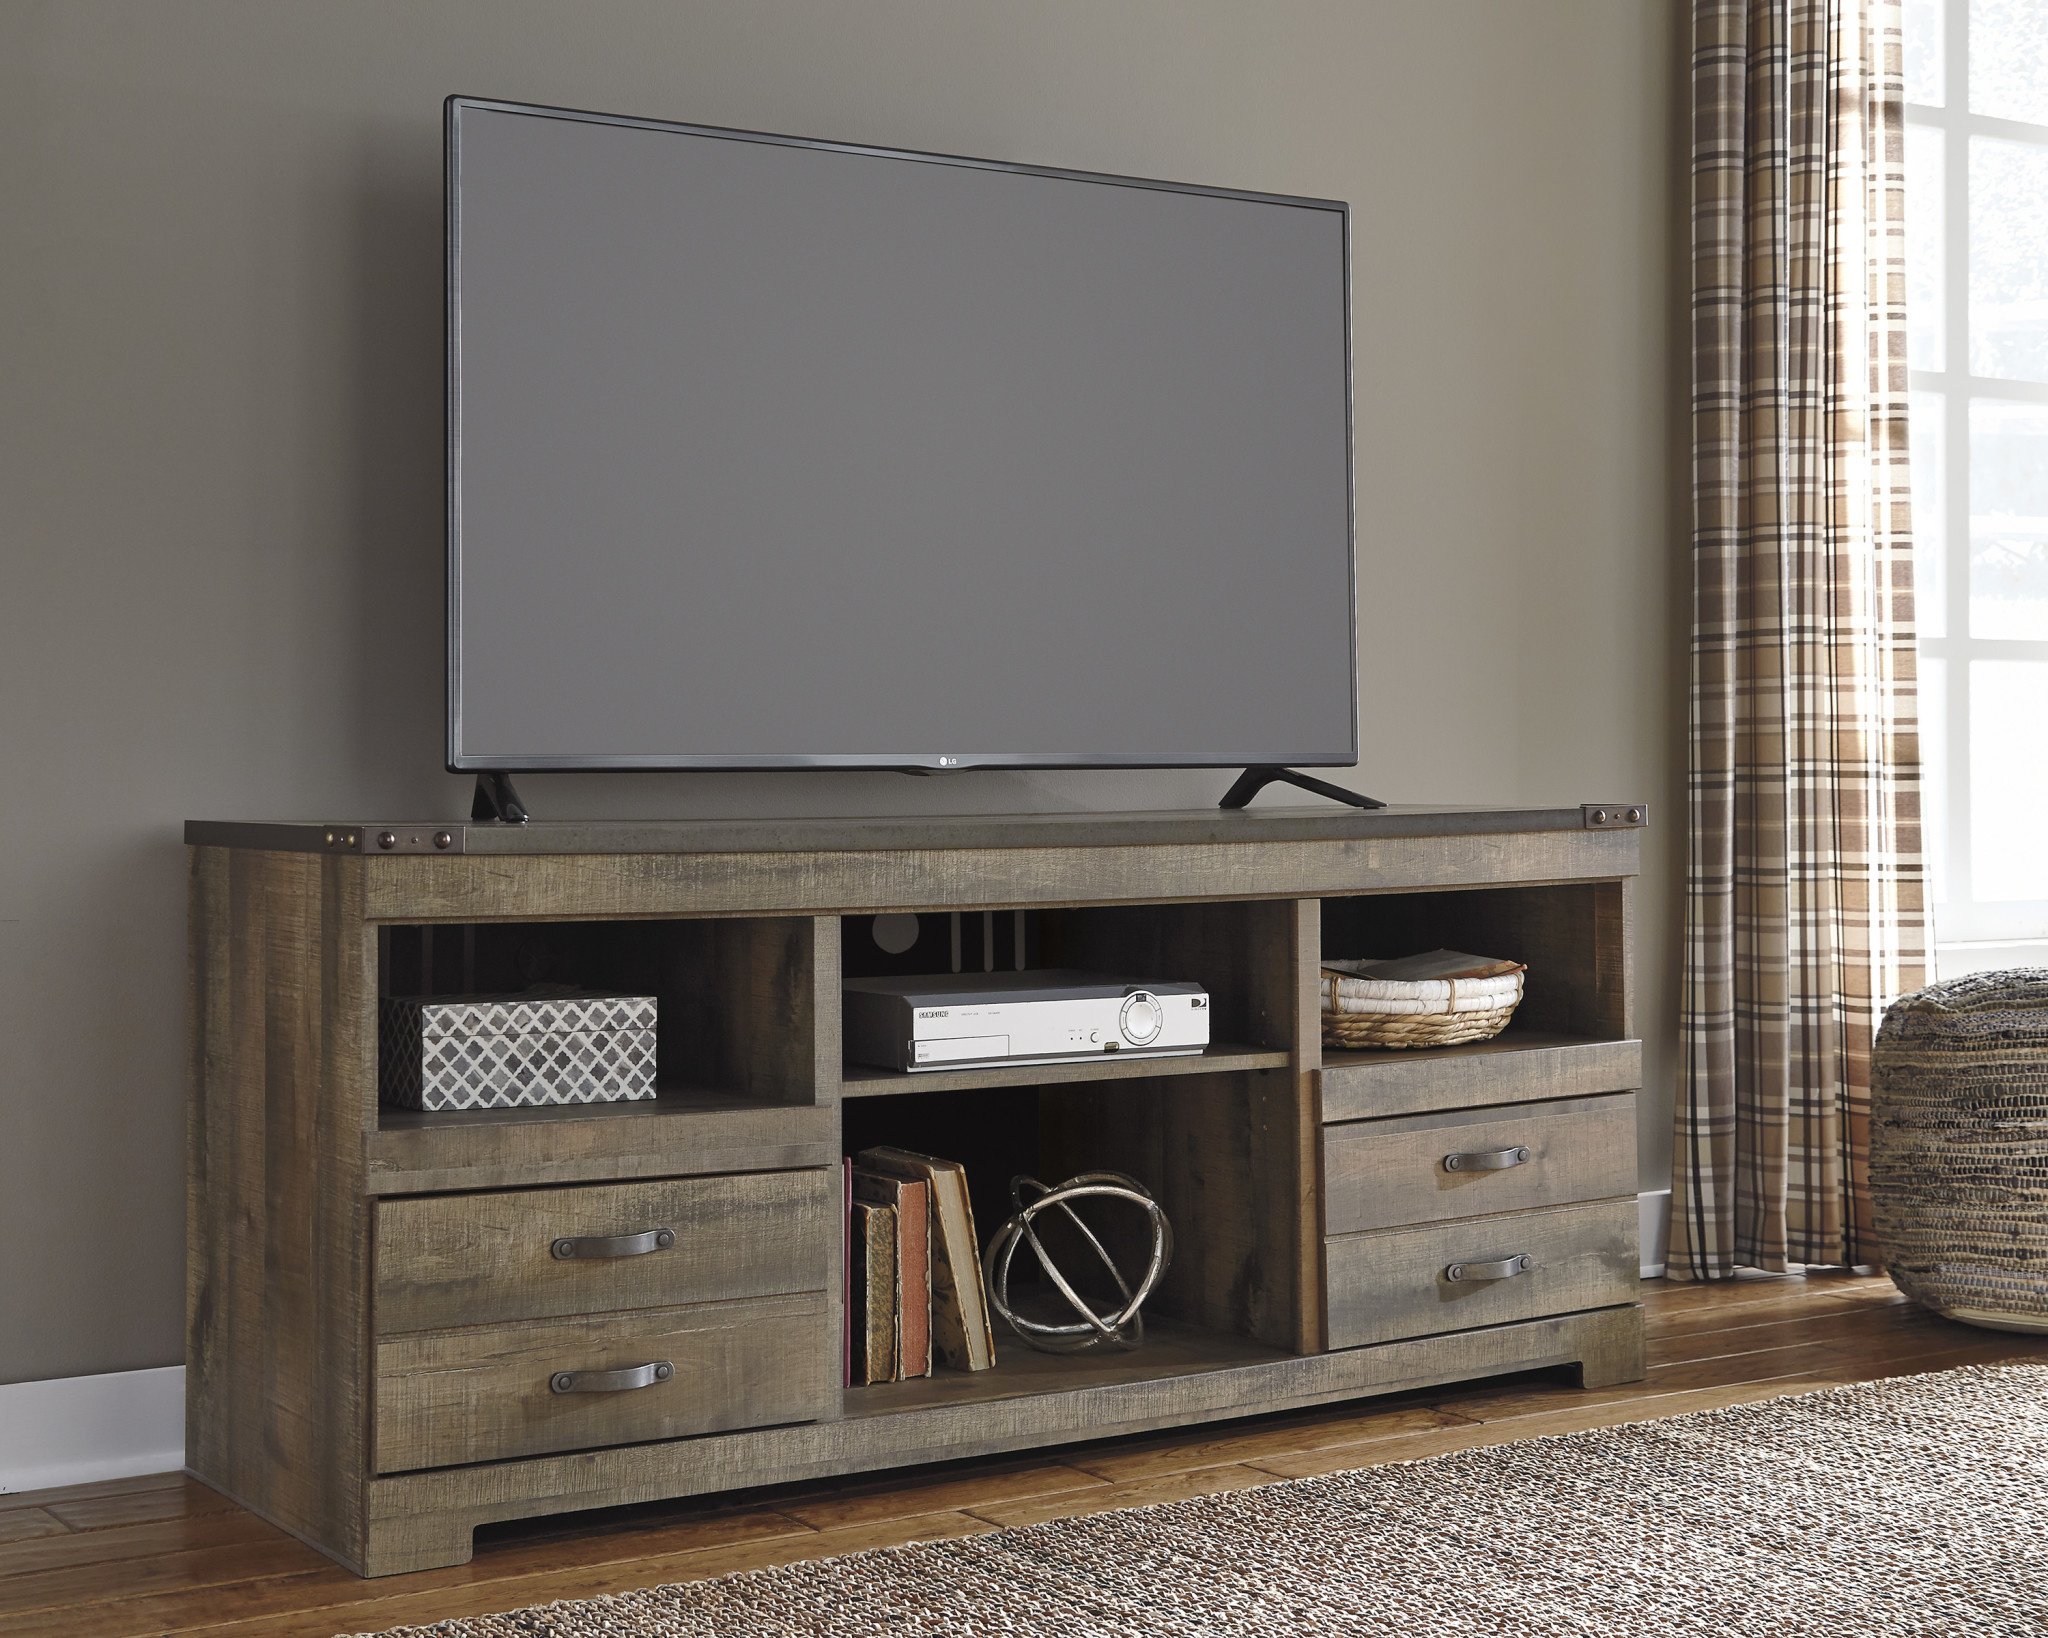 Signature Design LG TV STAND W/FIREPLACE OPTION- W446-68, Trinell